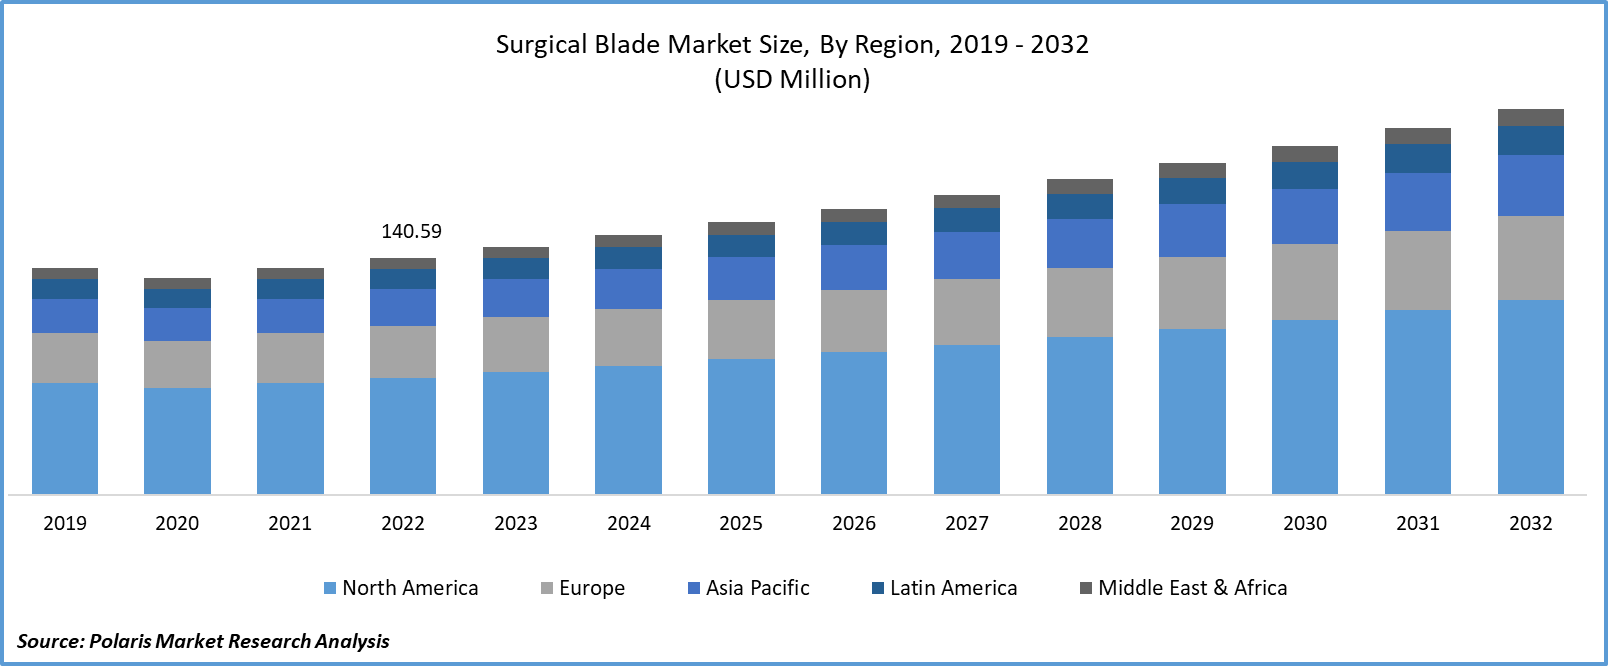 Surgical Blade Market Size